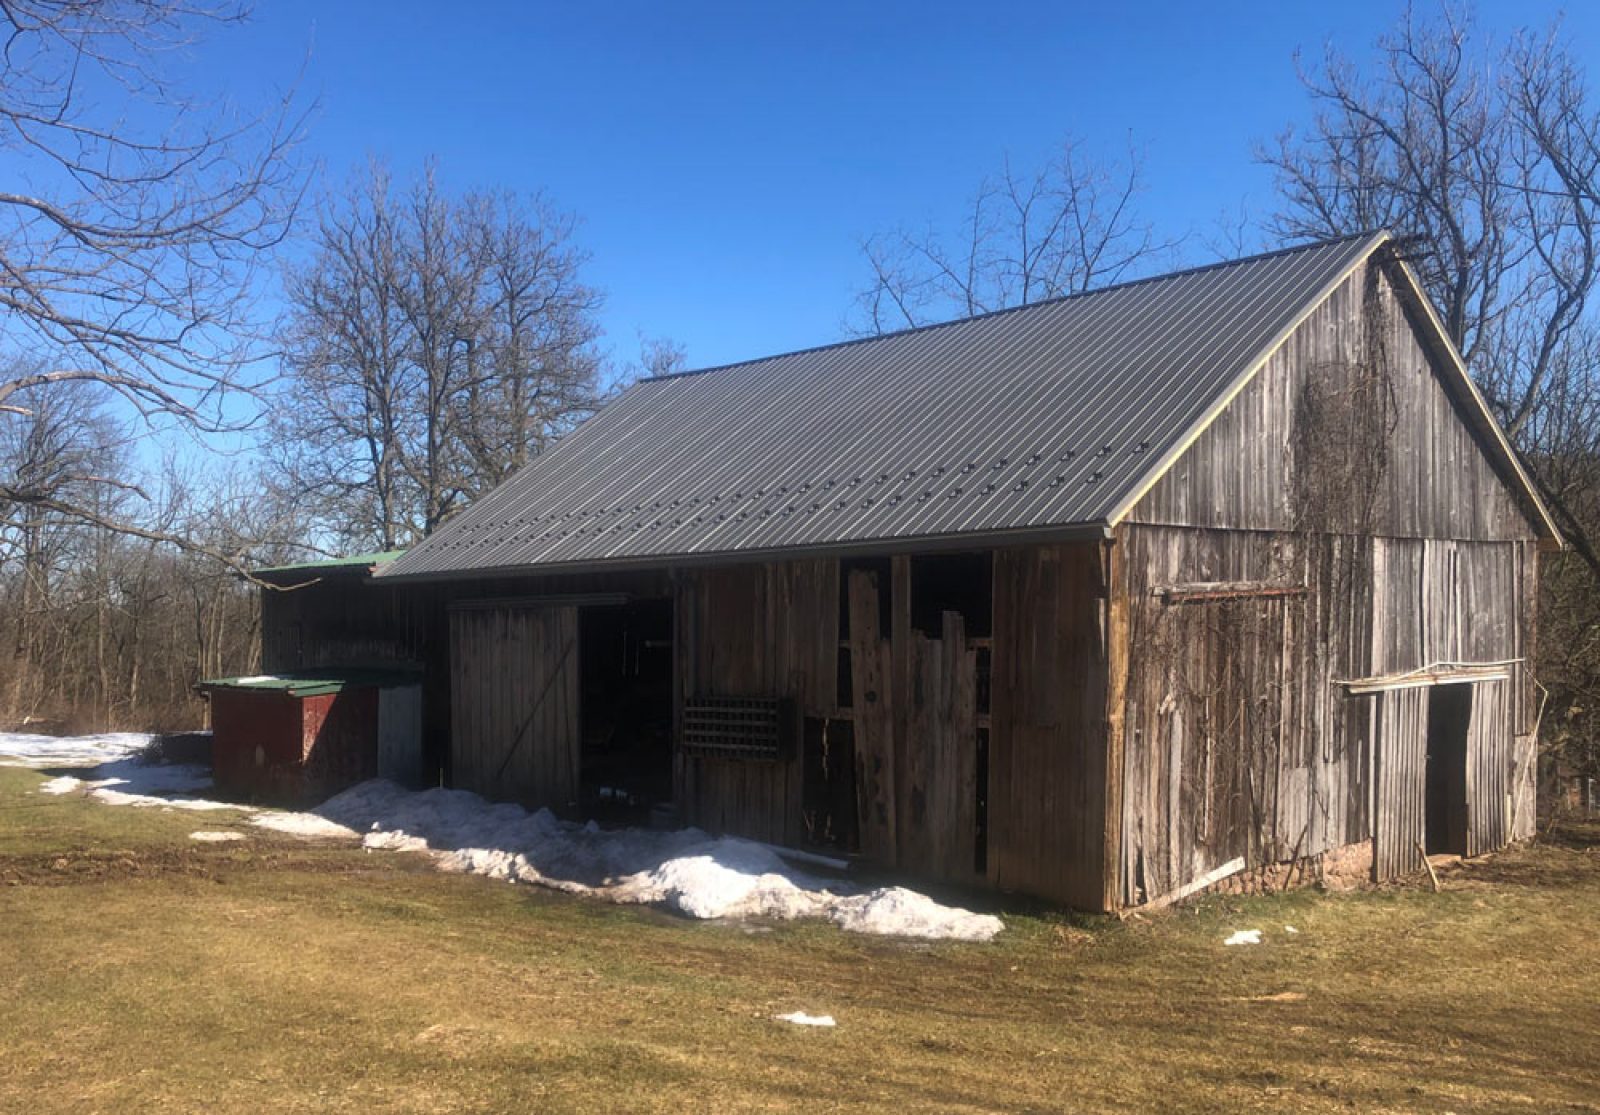 New Charcoal colored Metal Roofing Job on an old barn in Elverson, PA